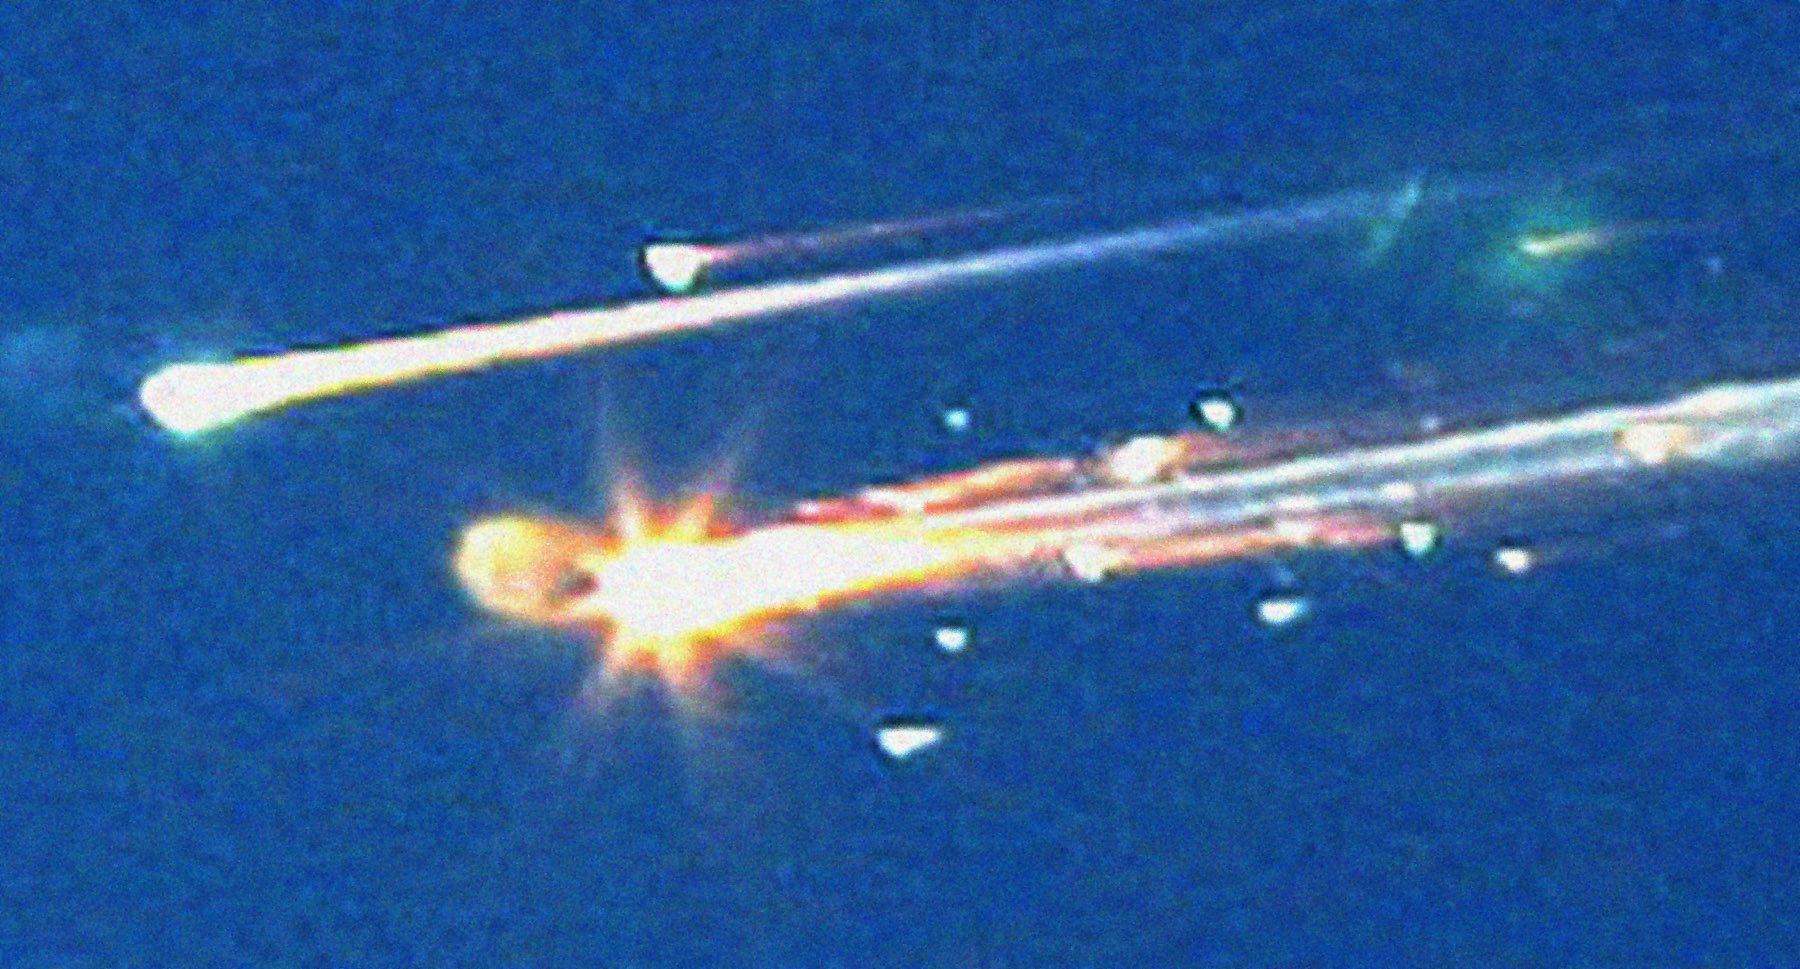 In this Saturday, Feb. 1, 2003 file photo, debris from the space shuttle Columbia streaks across the sky over Tyler, Texas. A new NASA report says that the seat restraints, suits and helmets of the doomed crew of the space shuttle Columbia didn't work well, leading to "lethal trauma" as the out-of-control ship broke apart, killing all seven astronauts. In a graphic 400-page report, NASA further studied the Feb. 1, 2003, shuttle tragedy to help them design their new shuttle replacement capsule more likely to survive an accident. (AP Photo/Dr. Scott Lieberman, File)